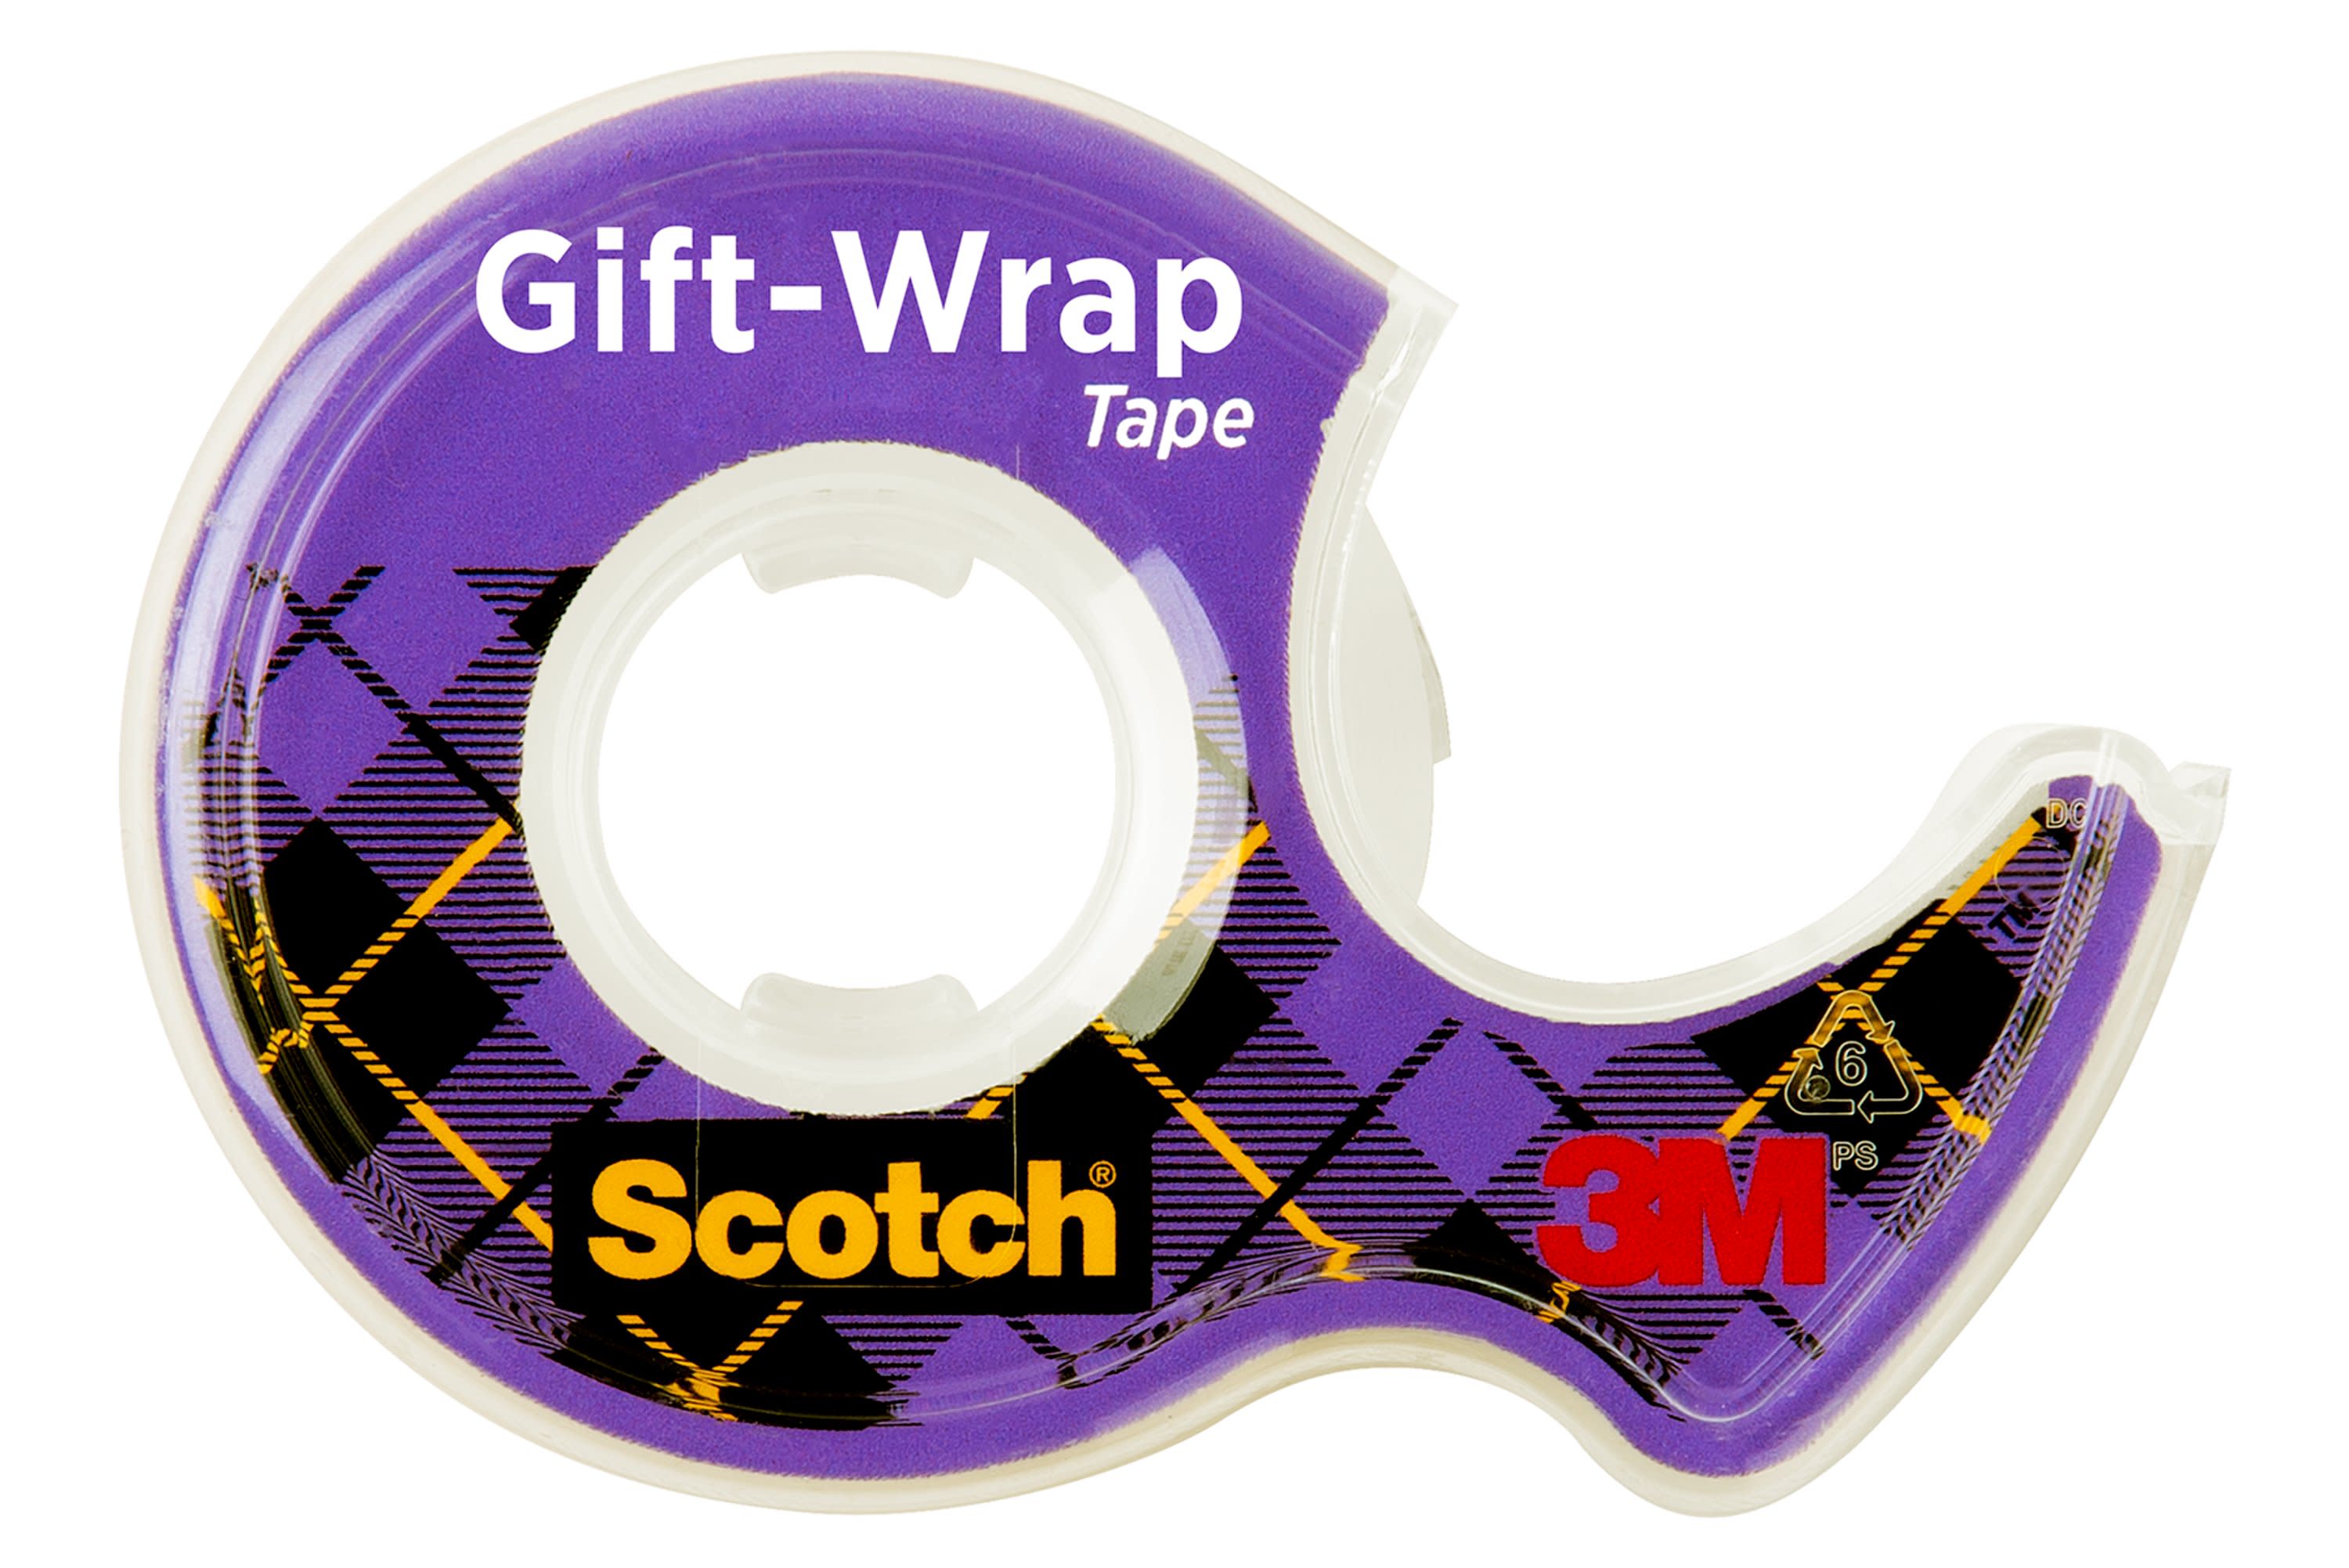 Scotch® Gift-Wrap Tape, 3/4 in. x 650 in., 1 Dispenser/Pack - image 3 of 15